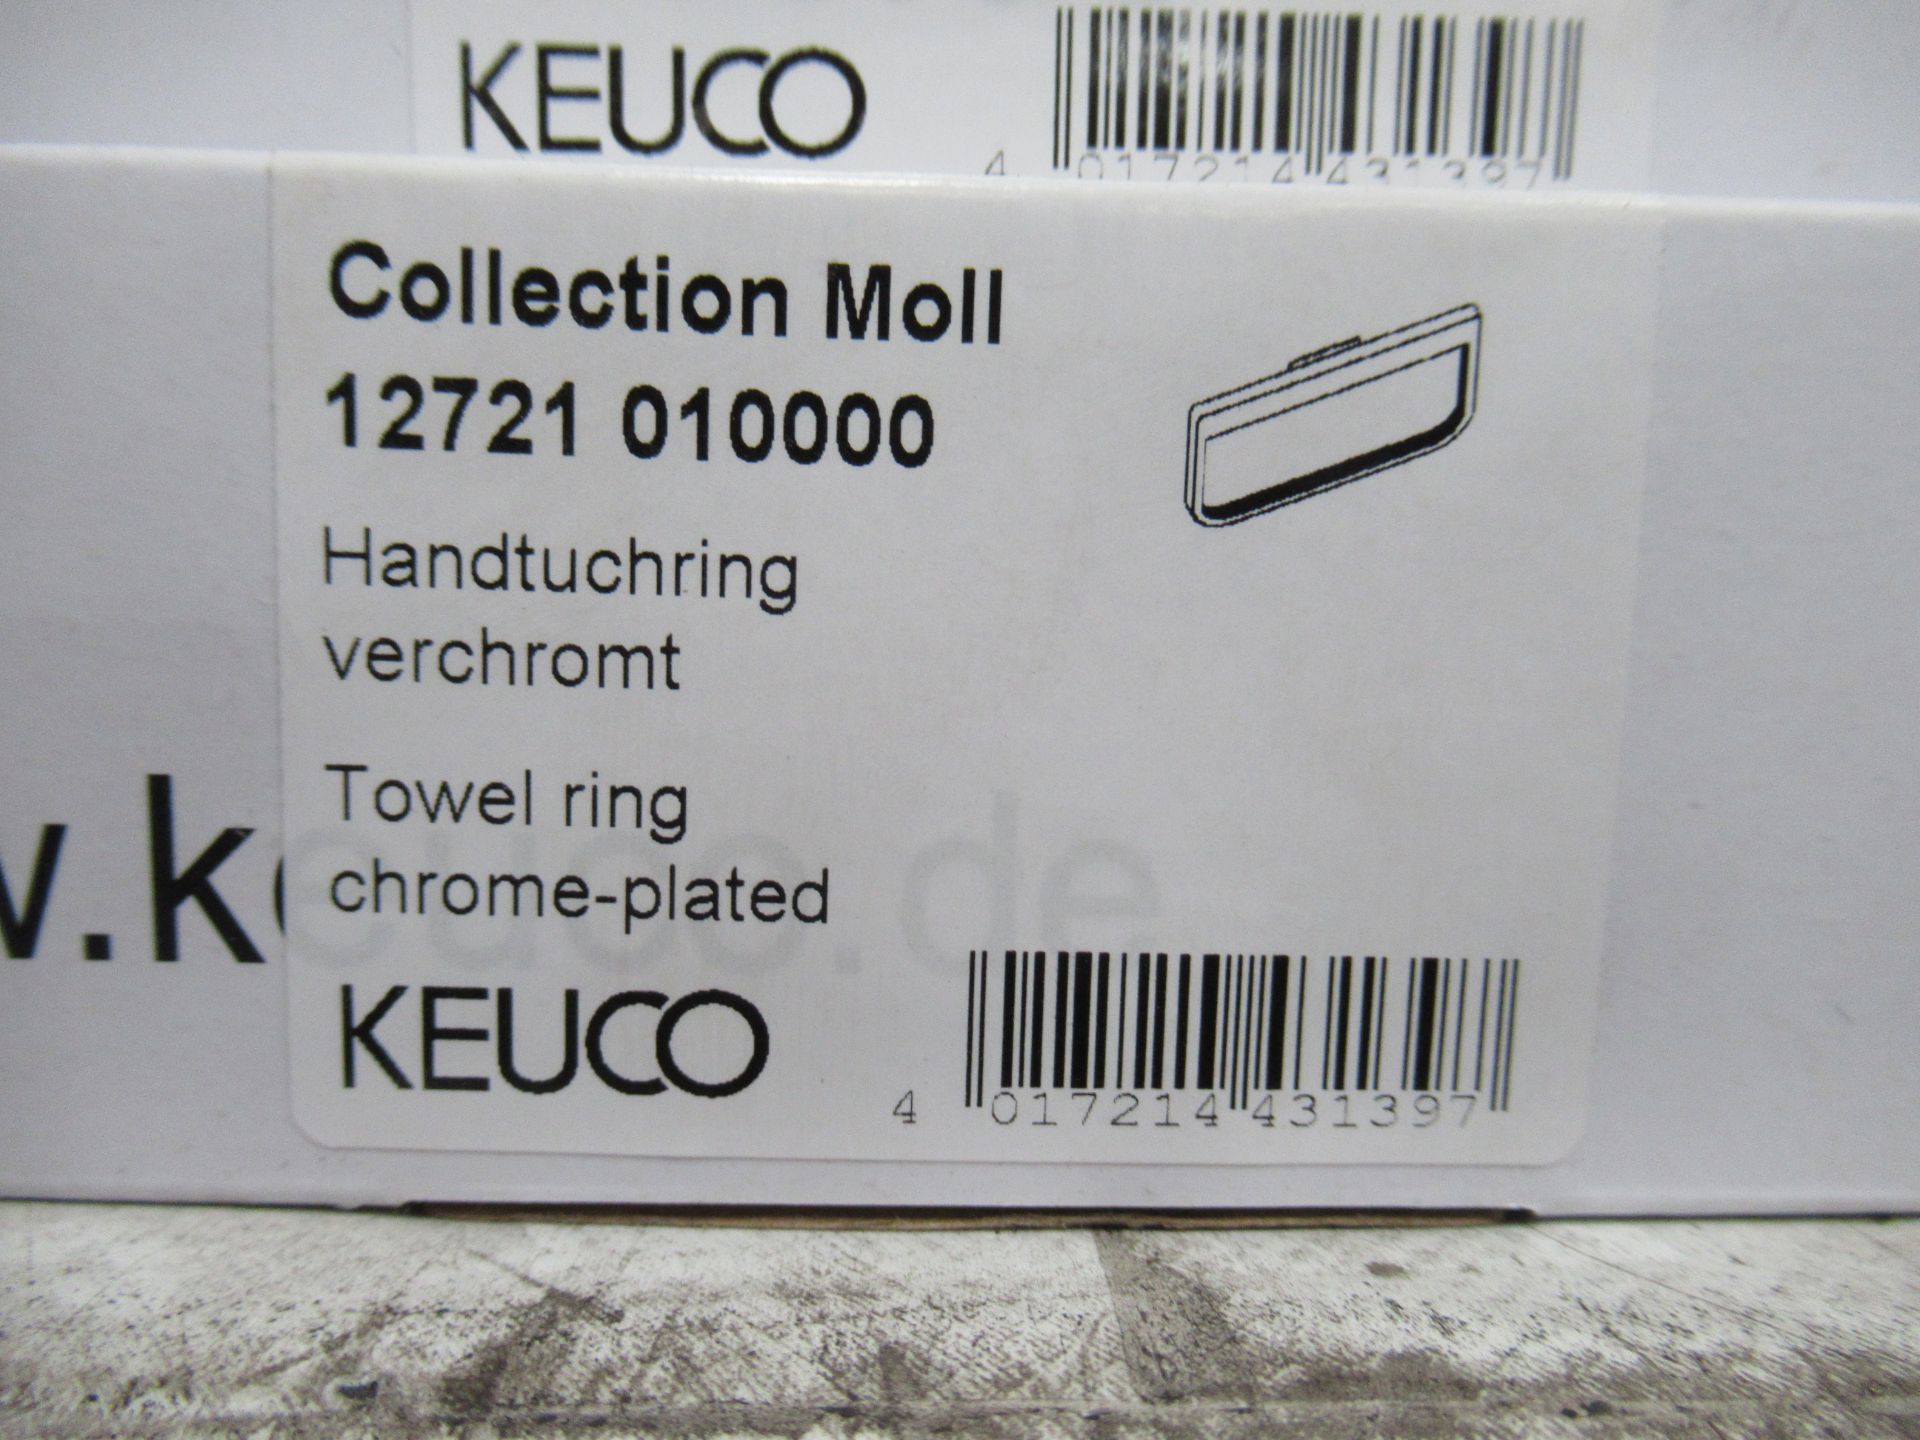 4 x Keuco Collection Moll Towel Rings, Chrome Plated, P/N 12721-010000 - Image 2 of 2